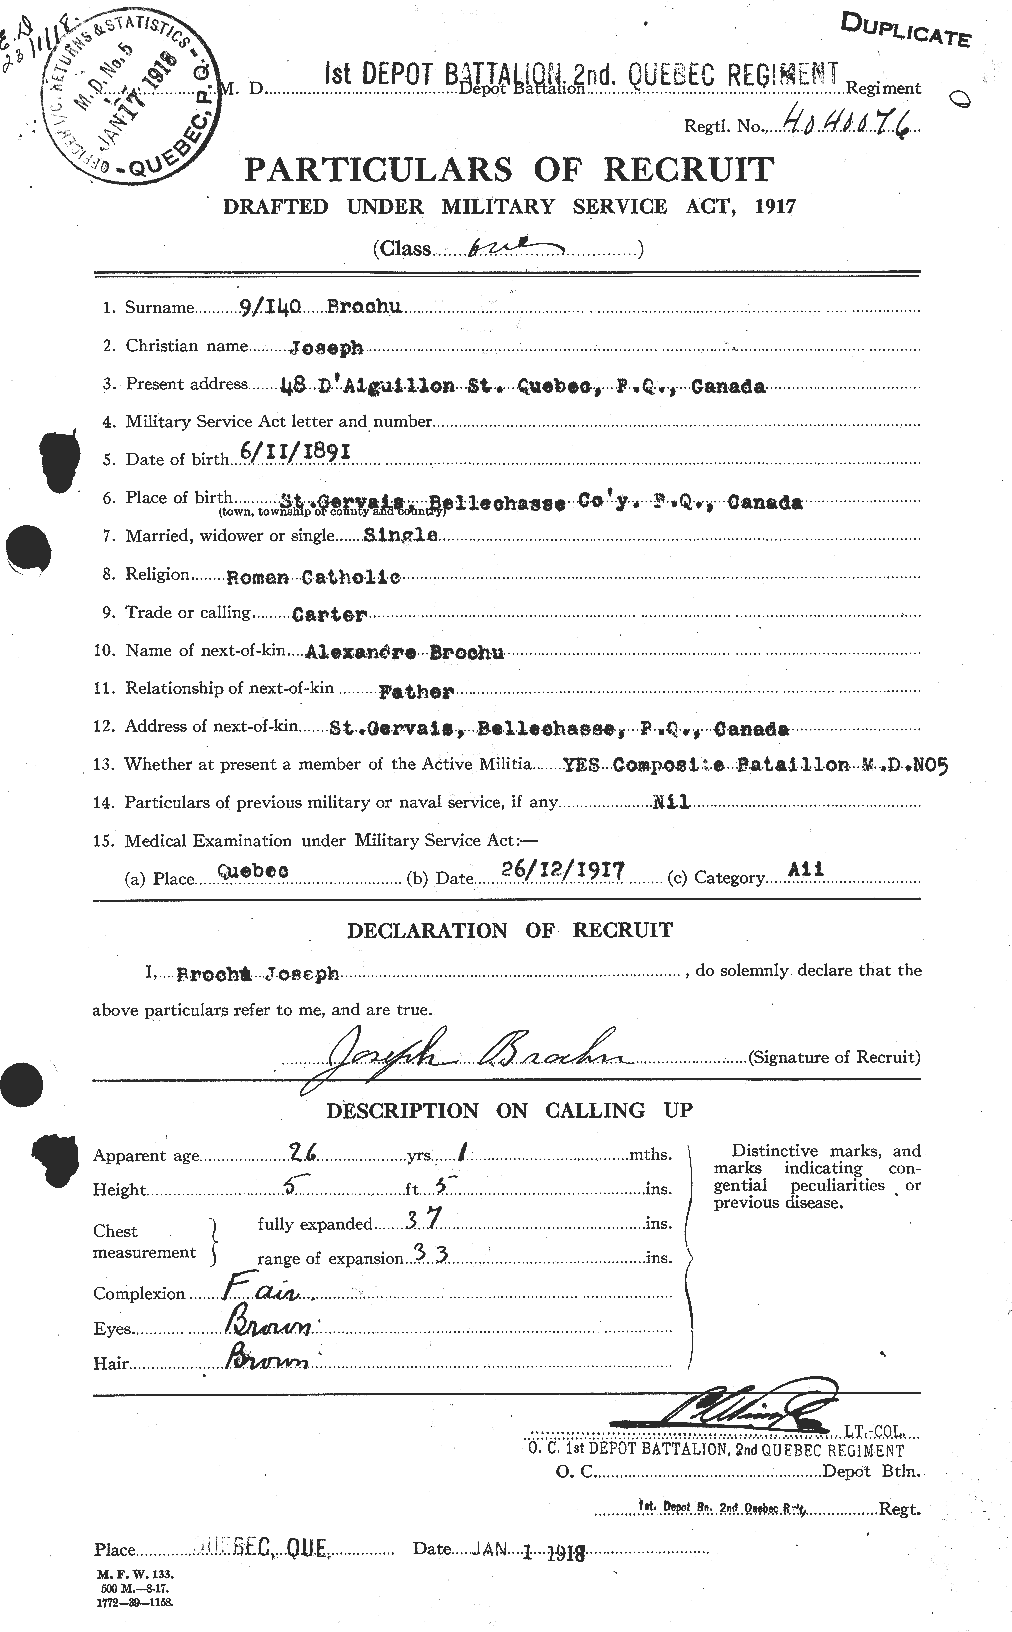 Personnel Records of the First World War - CEF 258155a